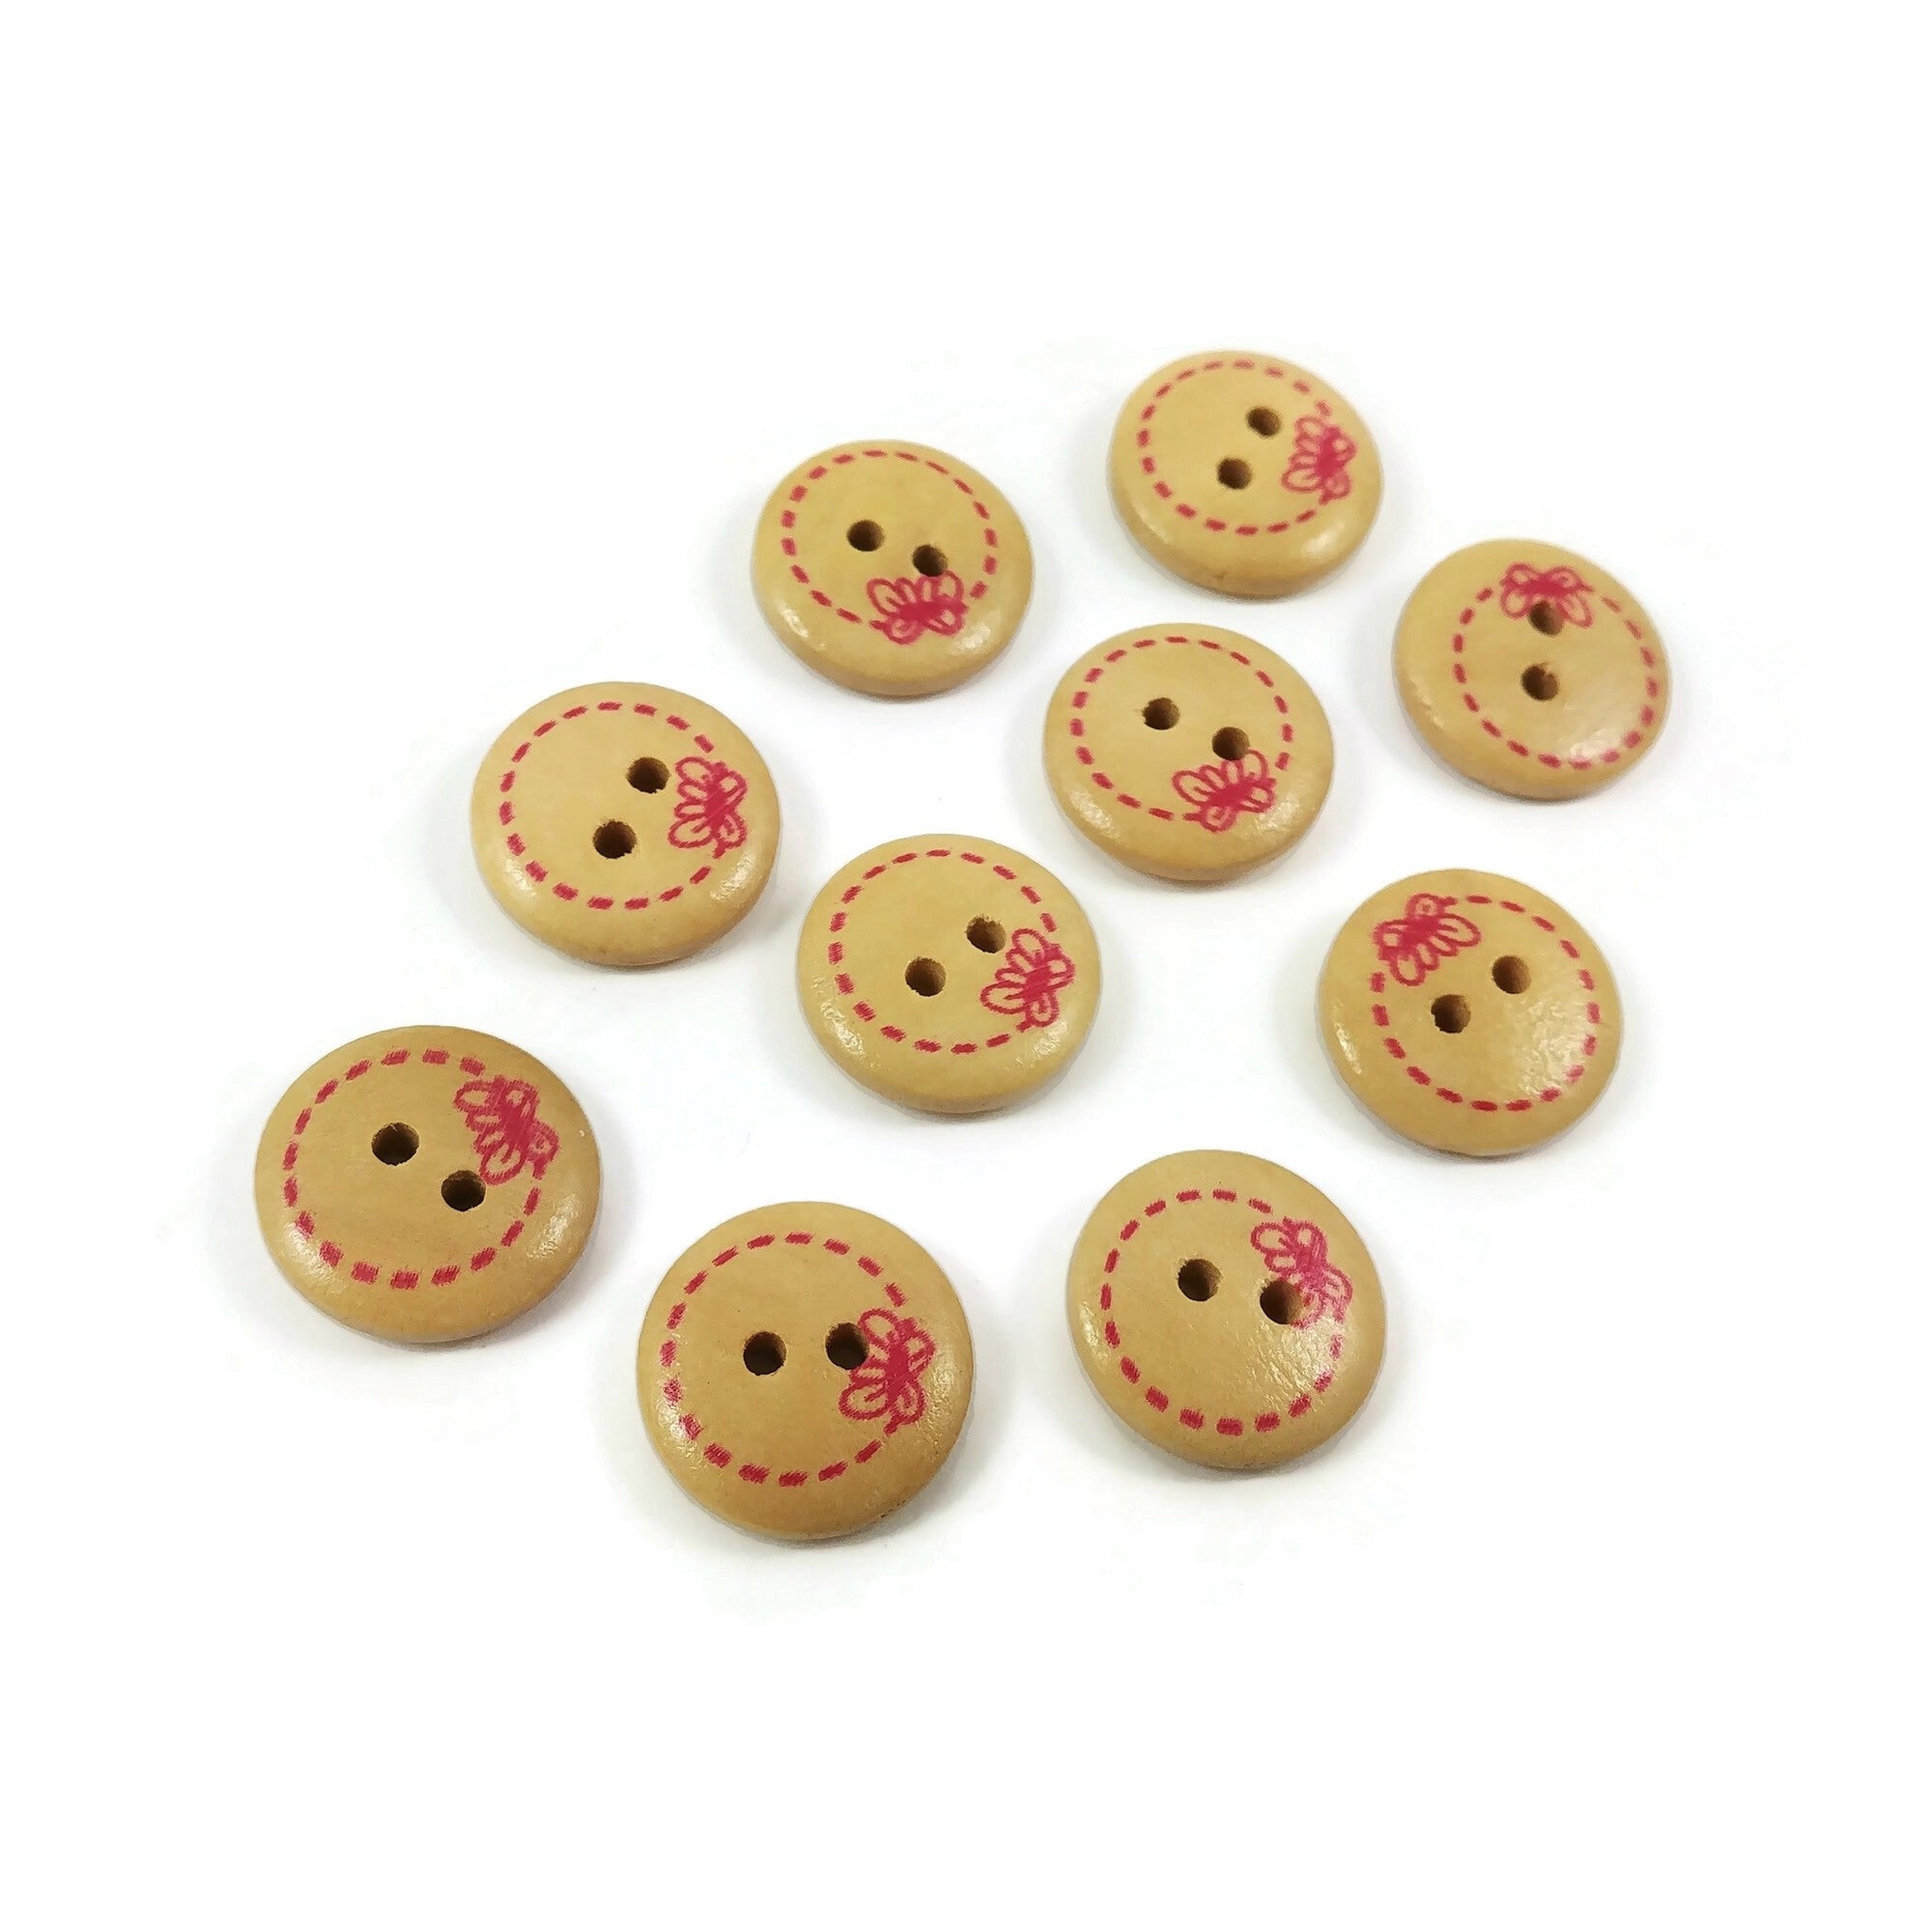 10 wood painted sewing buttons - pink bow 15mm